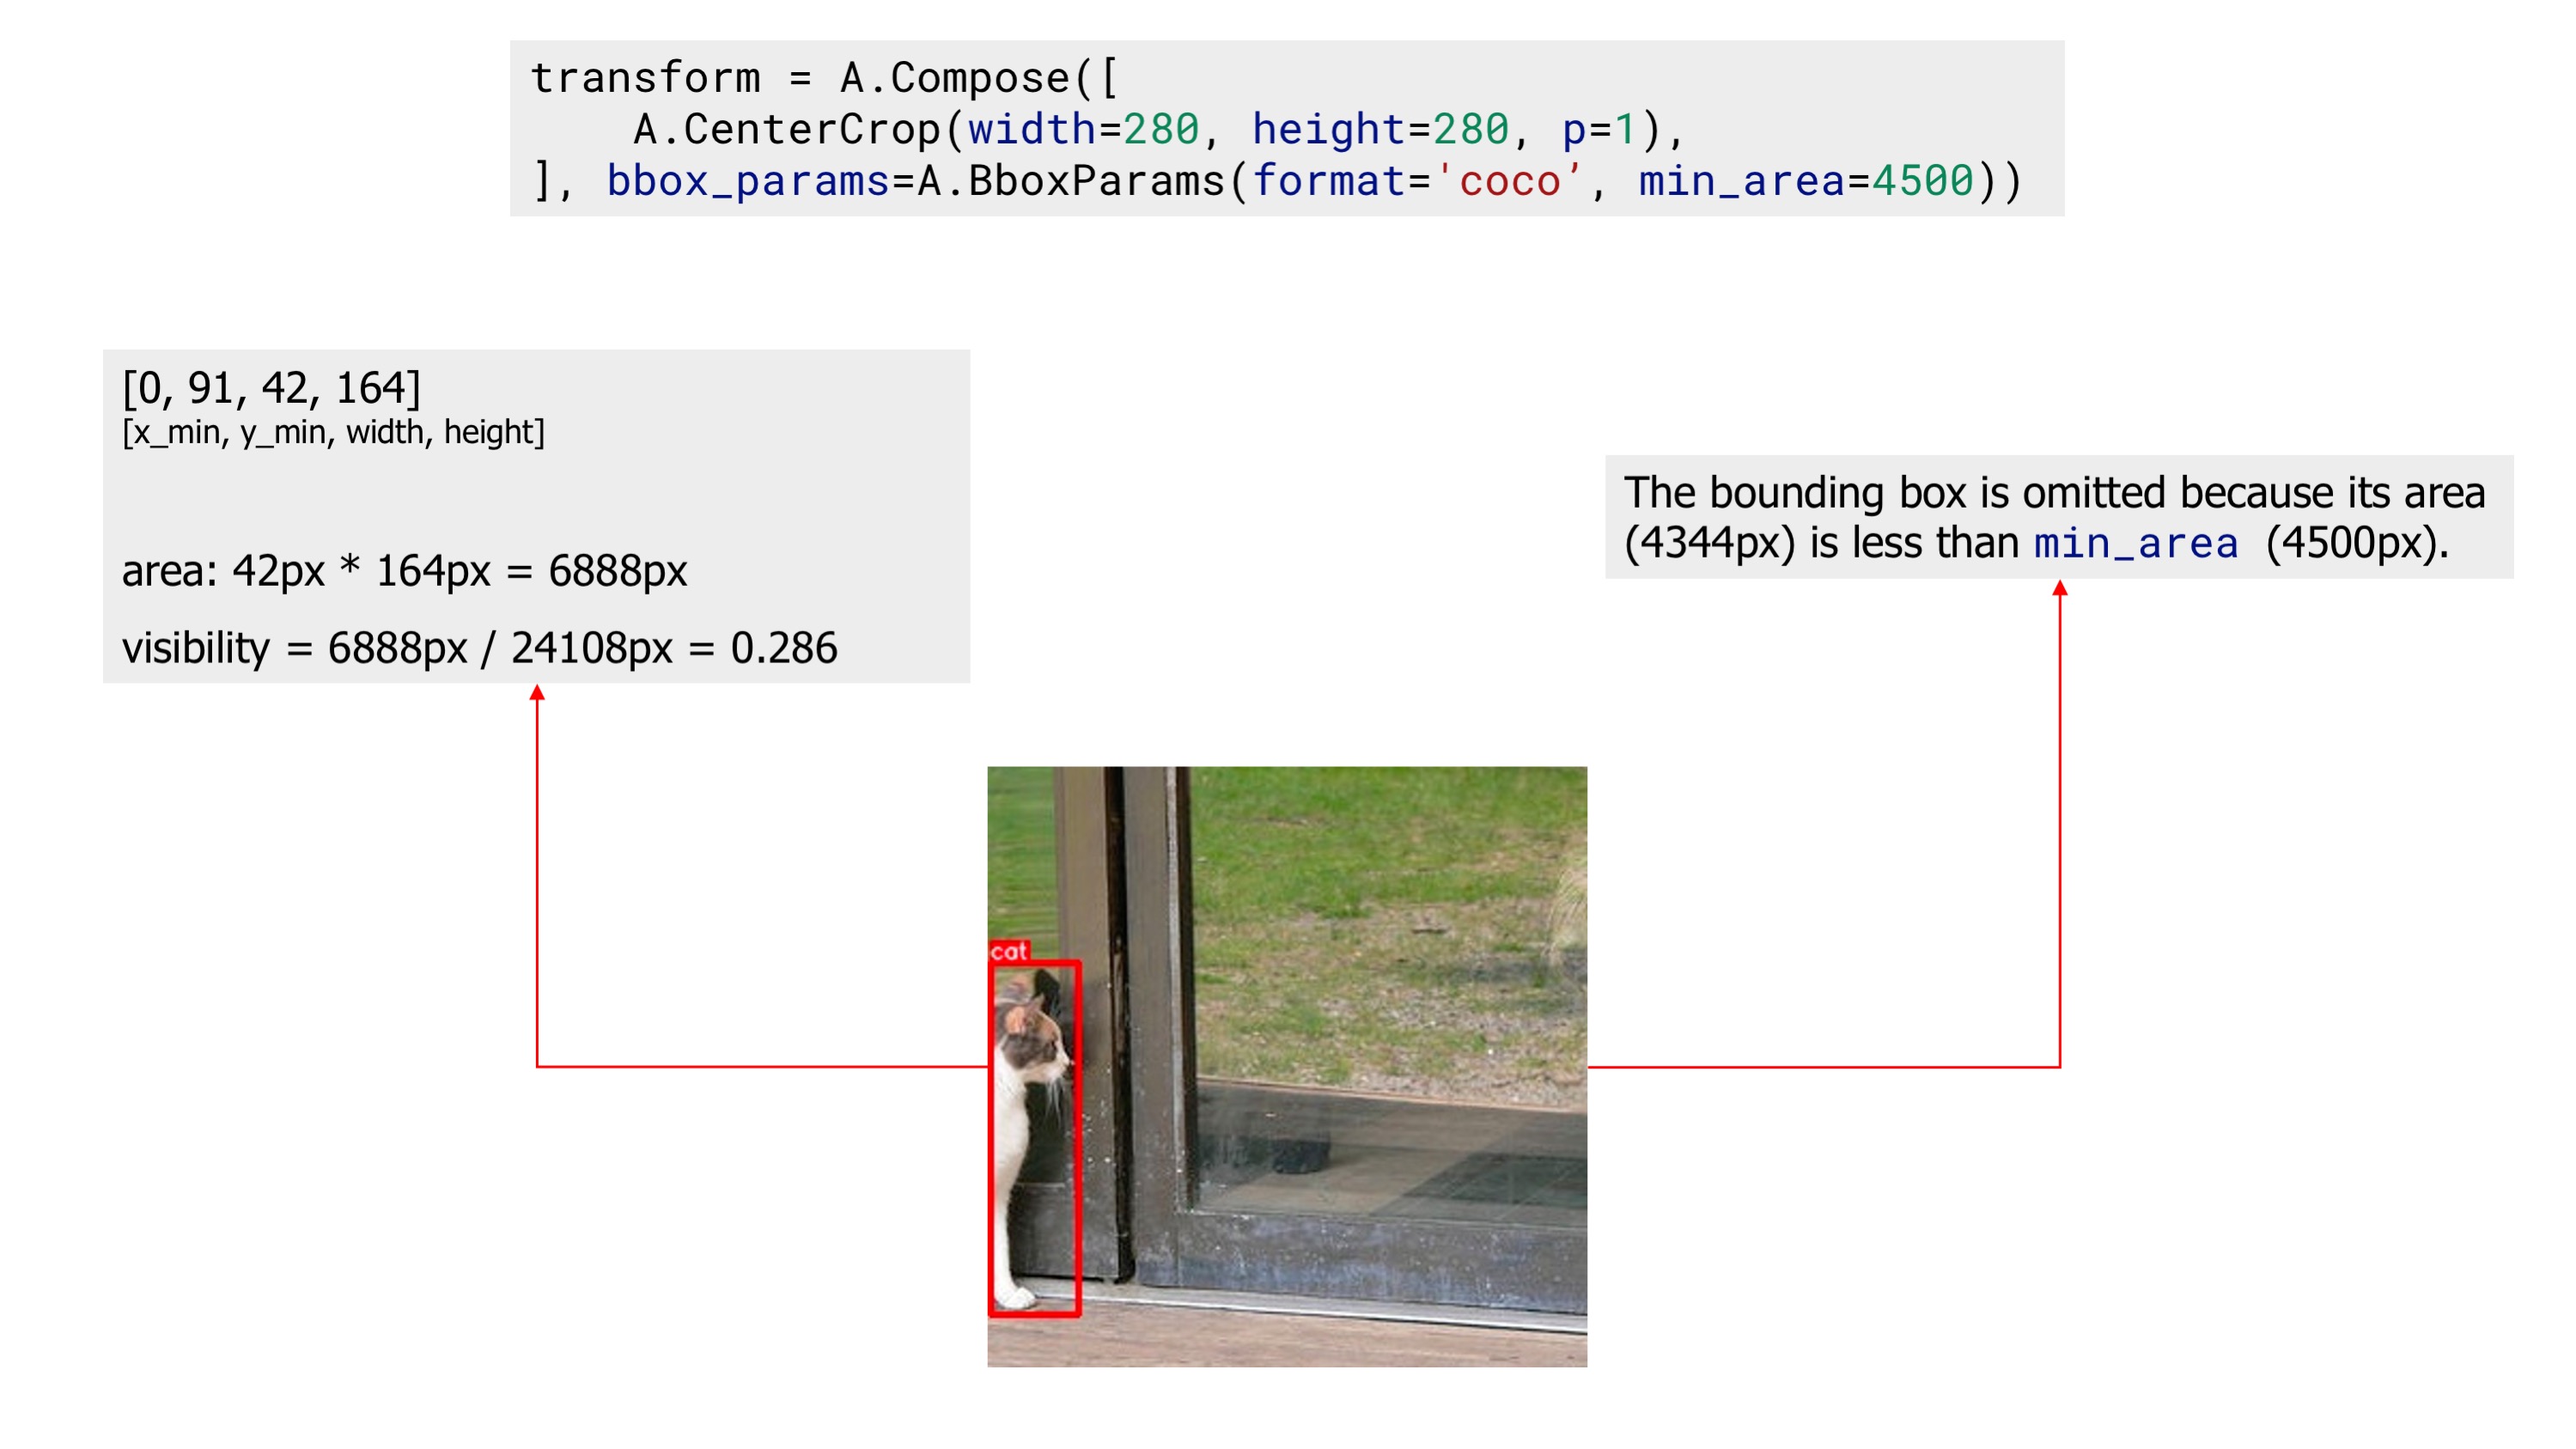 An example image with one bounding box after applying augmentation with 'min_area'